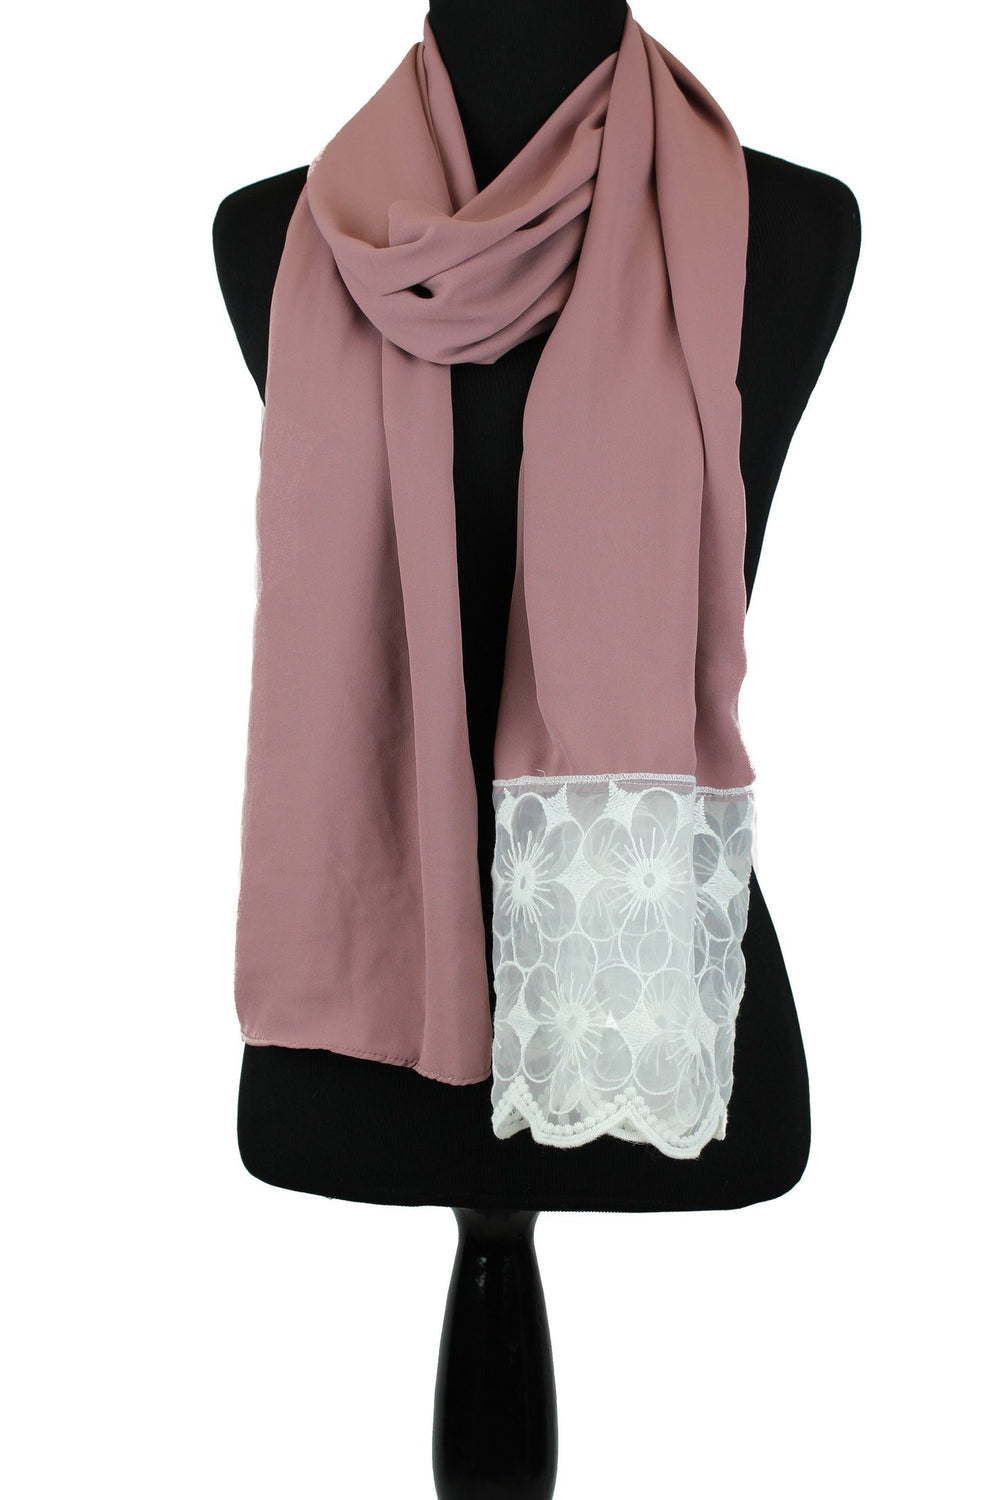 lace georgette hijab in mauve pink